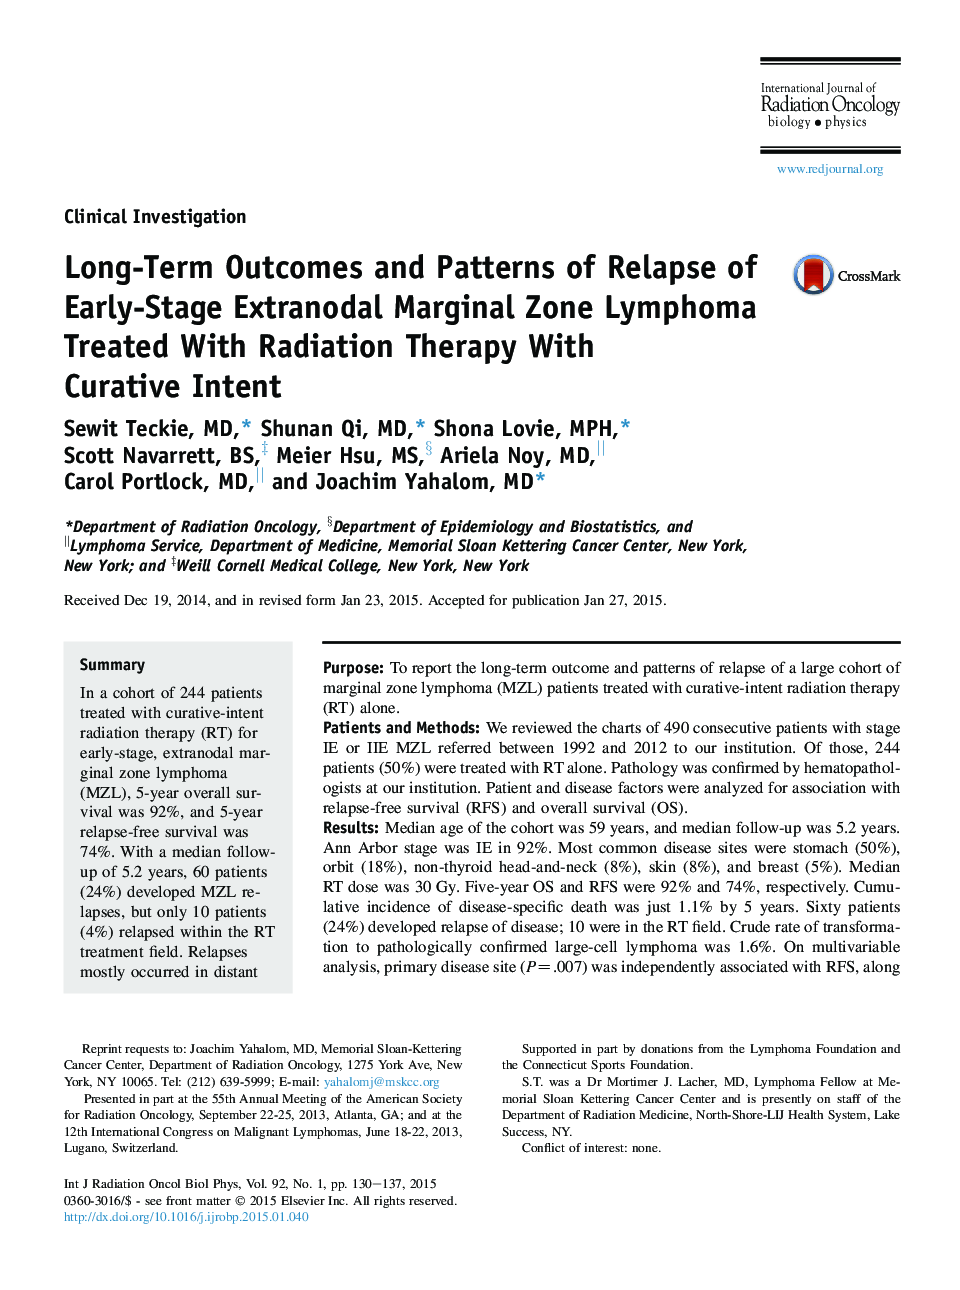 Long-Term Outcomes and Patterns of Relapse of Early-Stage Extranodal Marginal Zone Lymphoma Treated With Radiation Therapy With Curative Intent